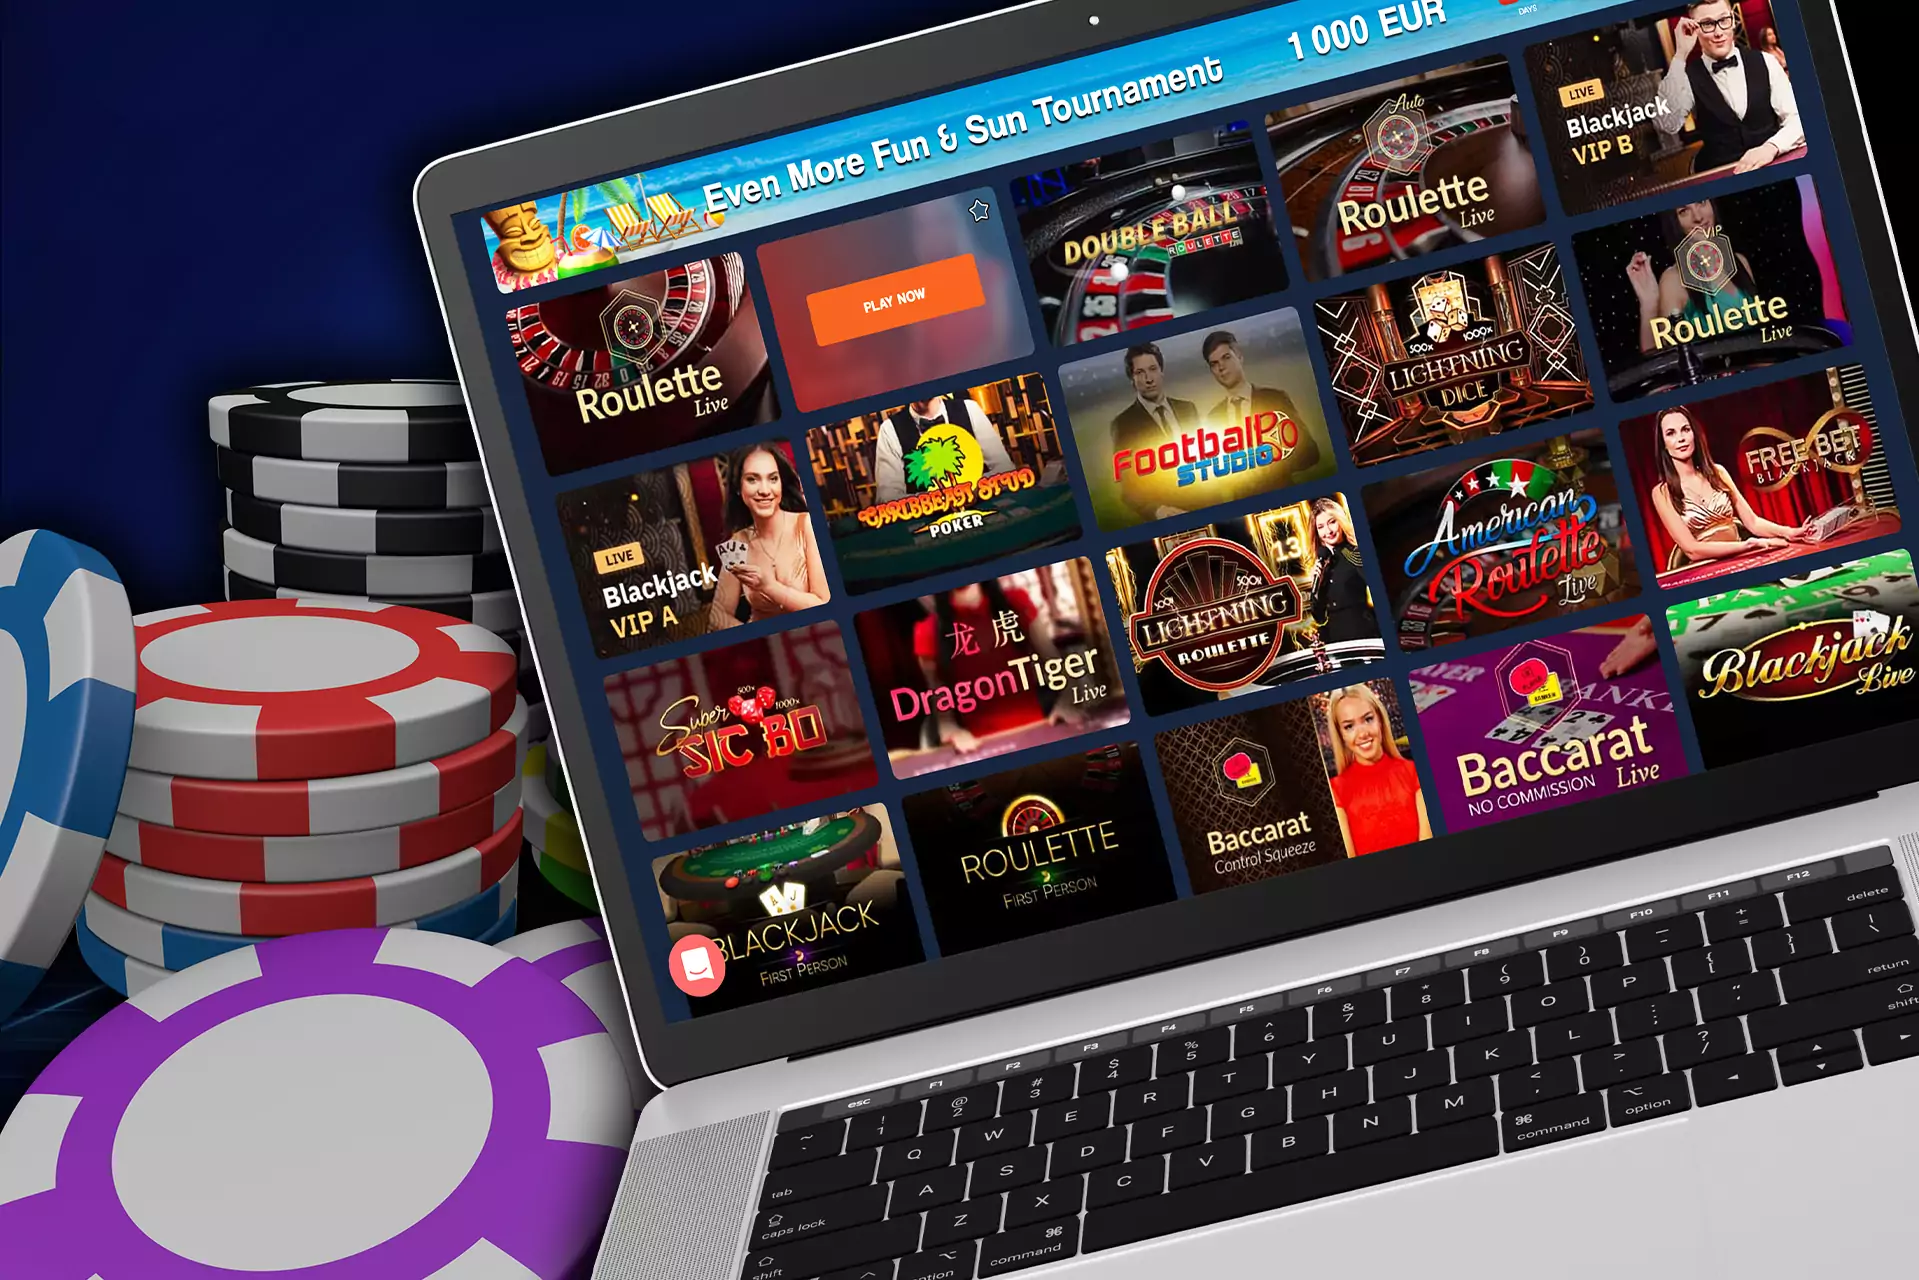 Between events, you can play slots and other casino games.